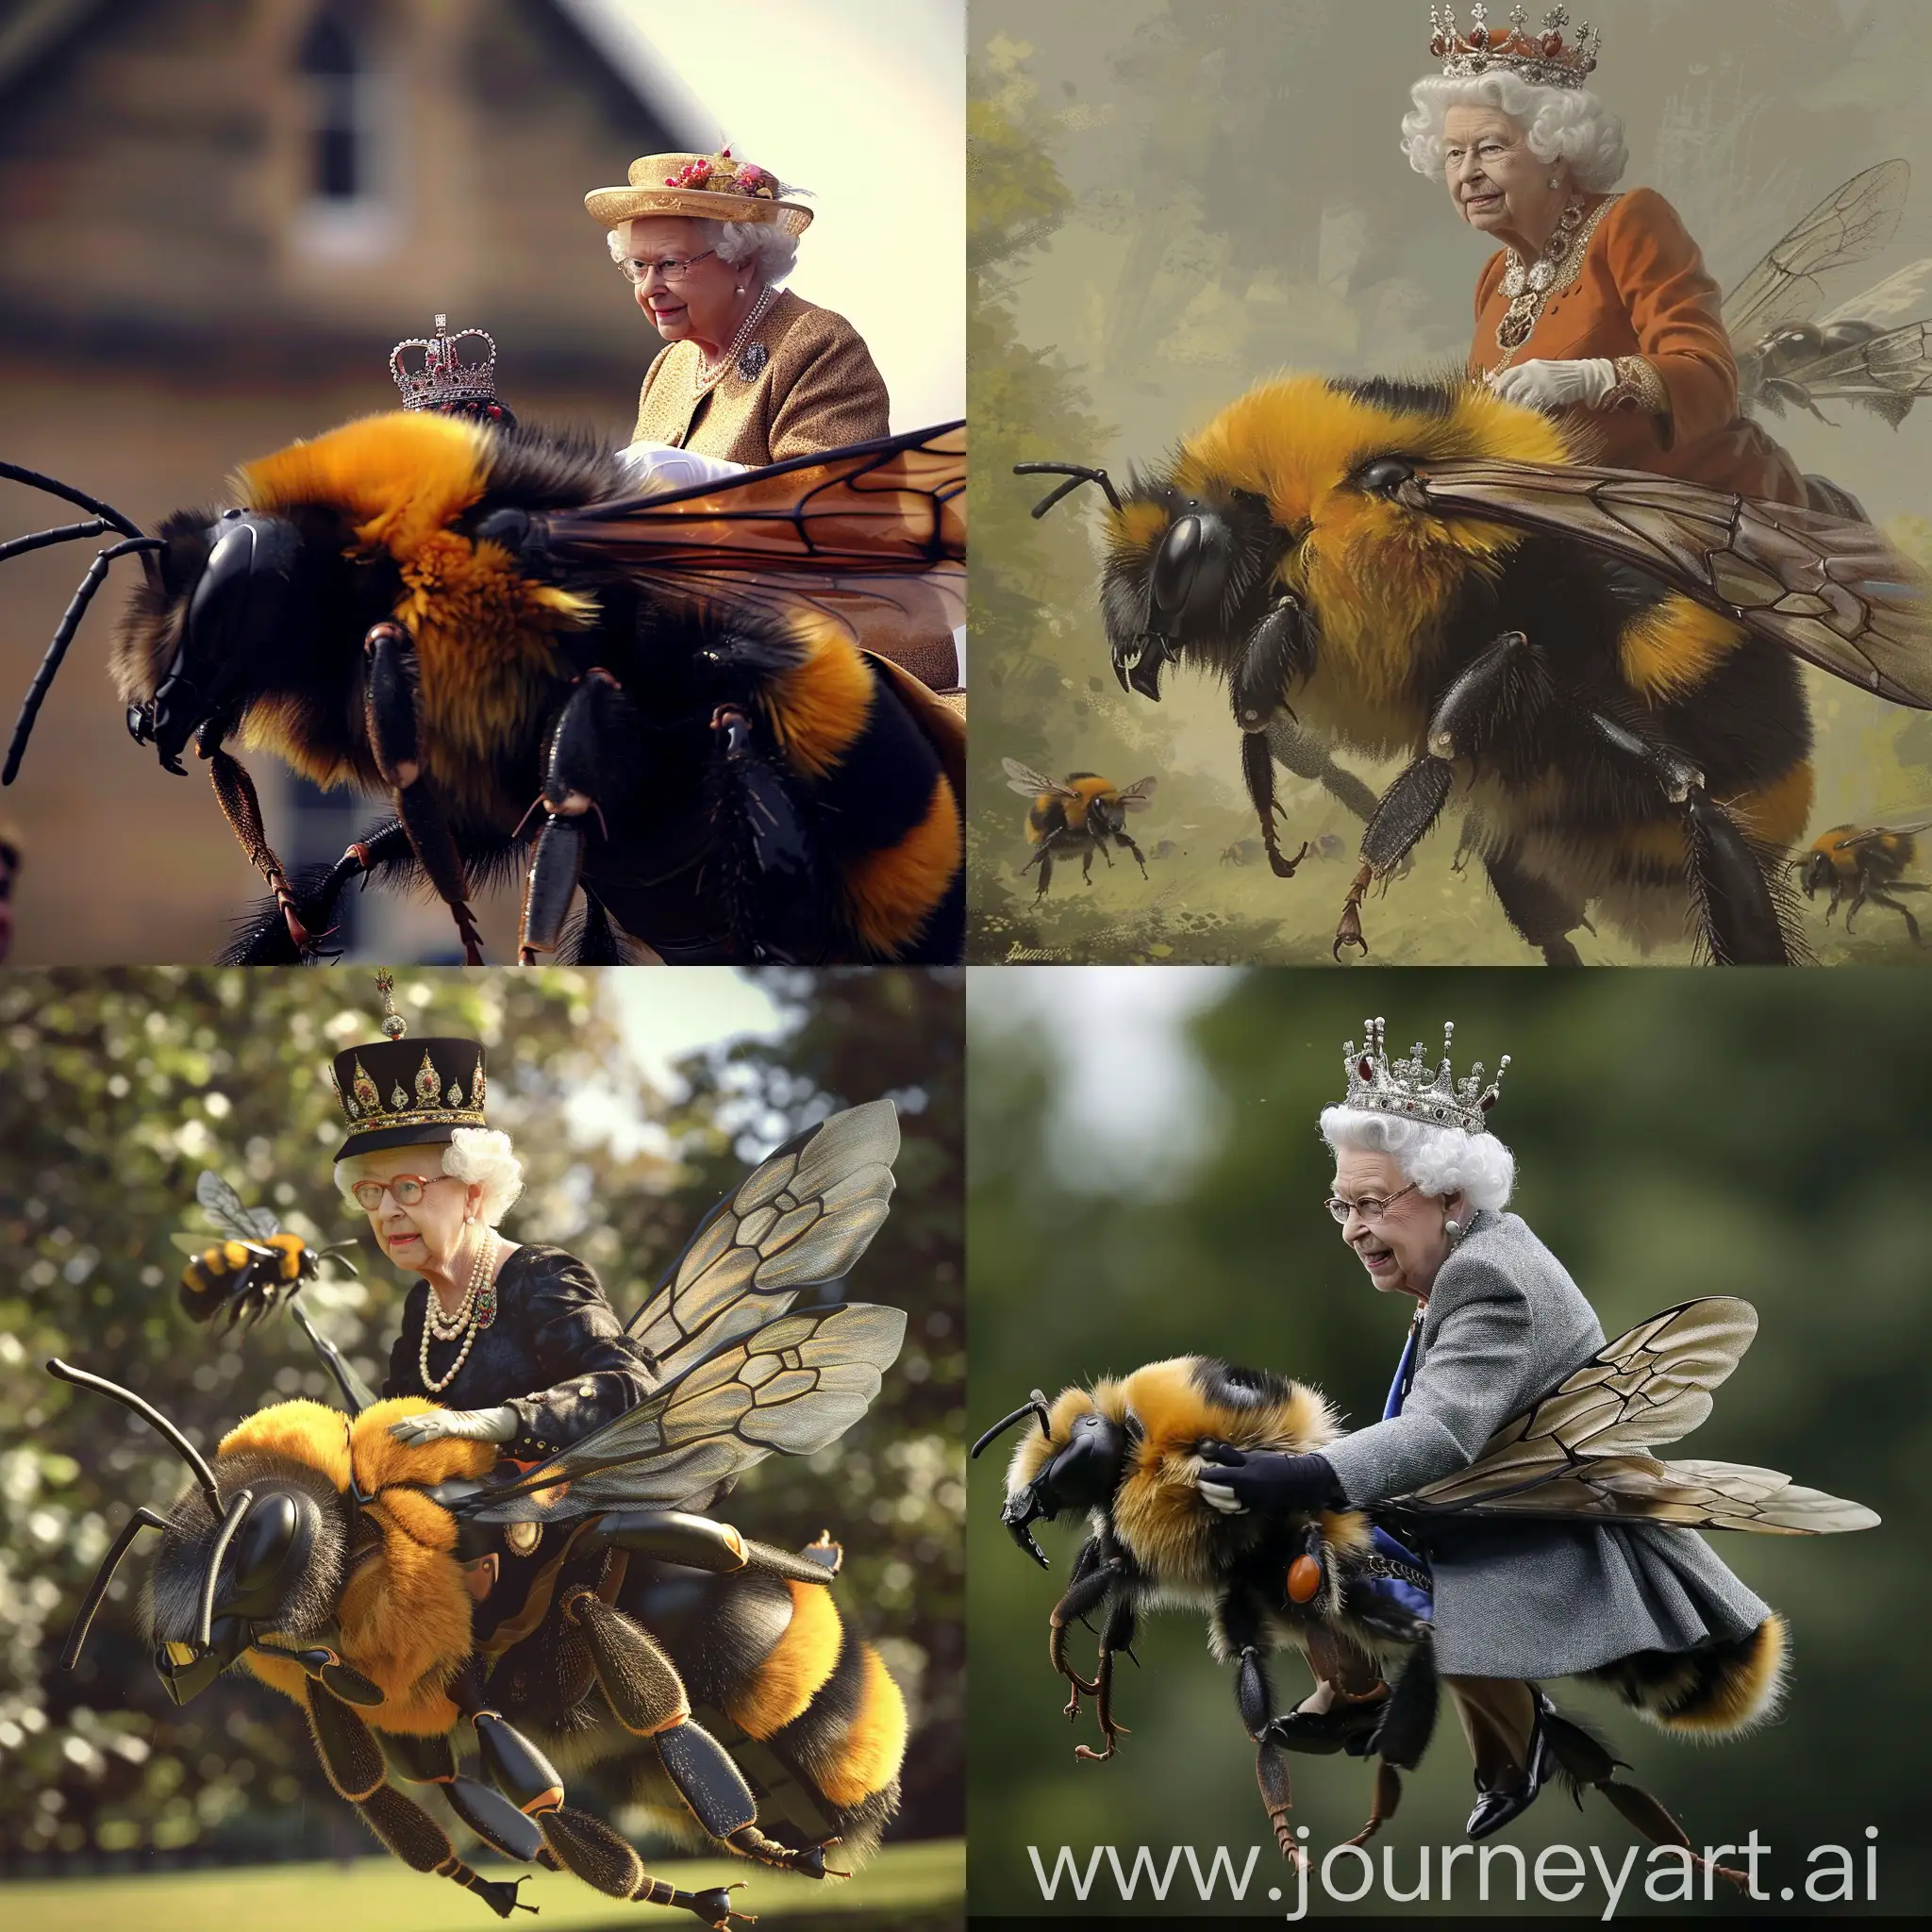 Queen-of-England-Riding-a-Giant-Bee-in-a-Majestic-Display